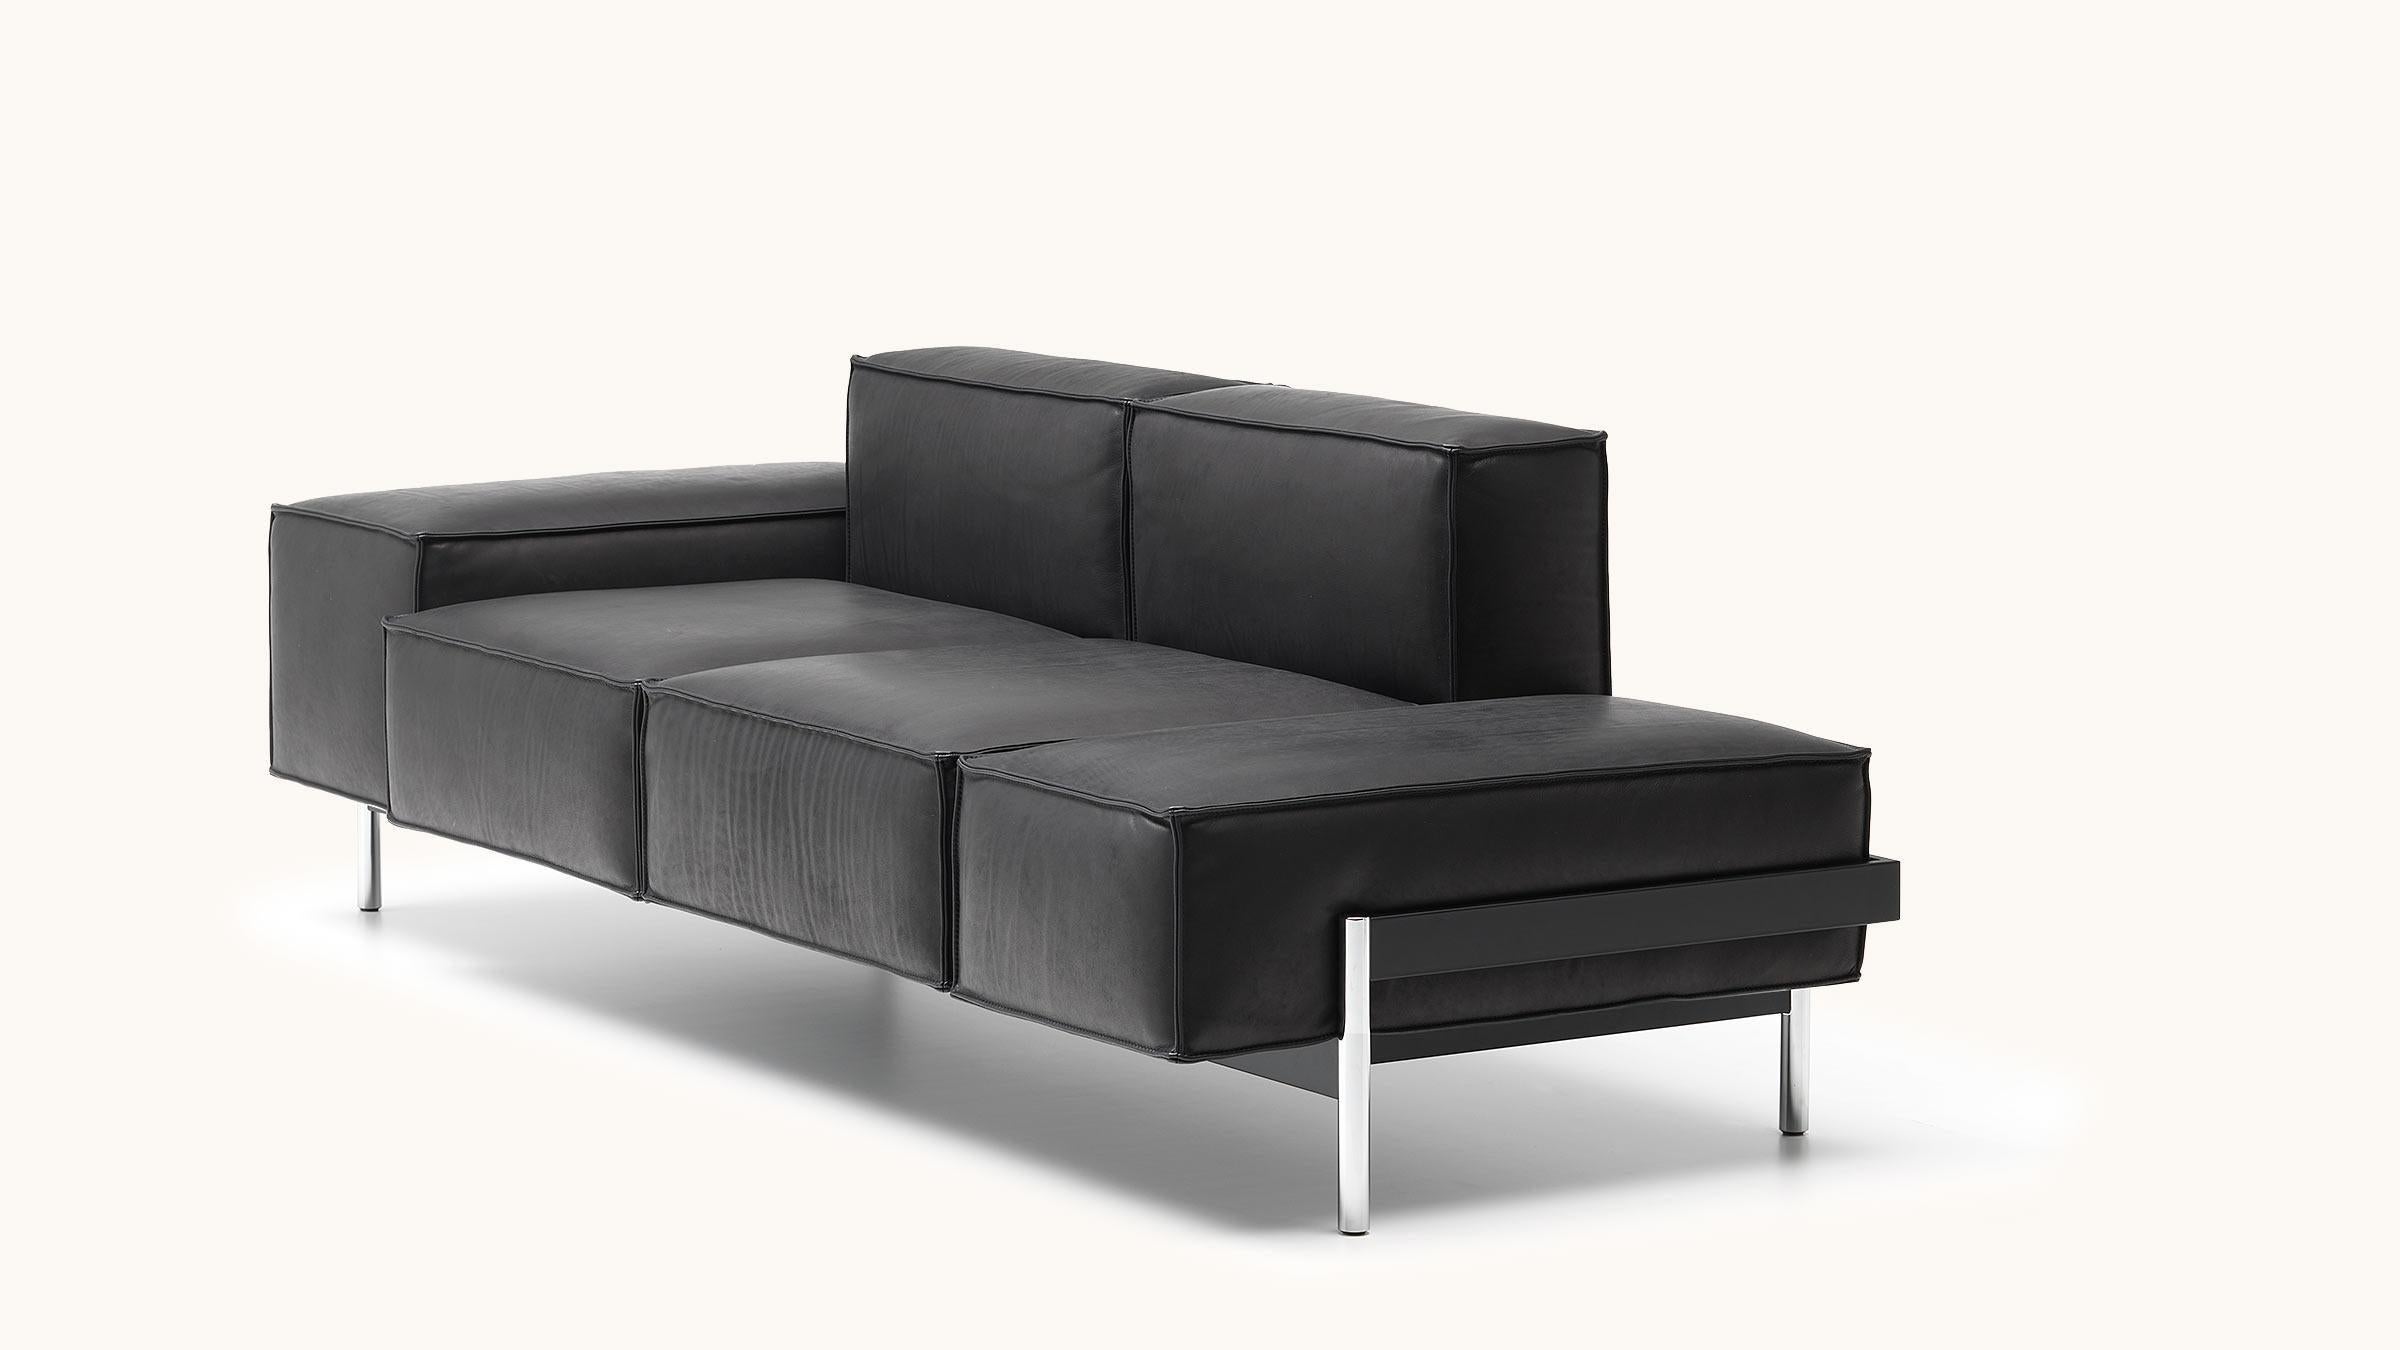 Swiss De Sede DS-21/123A Two-Seat Modular Sofa in Black Leather by Stephan Hürlemann For Sale